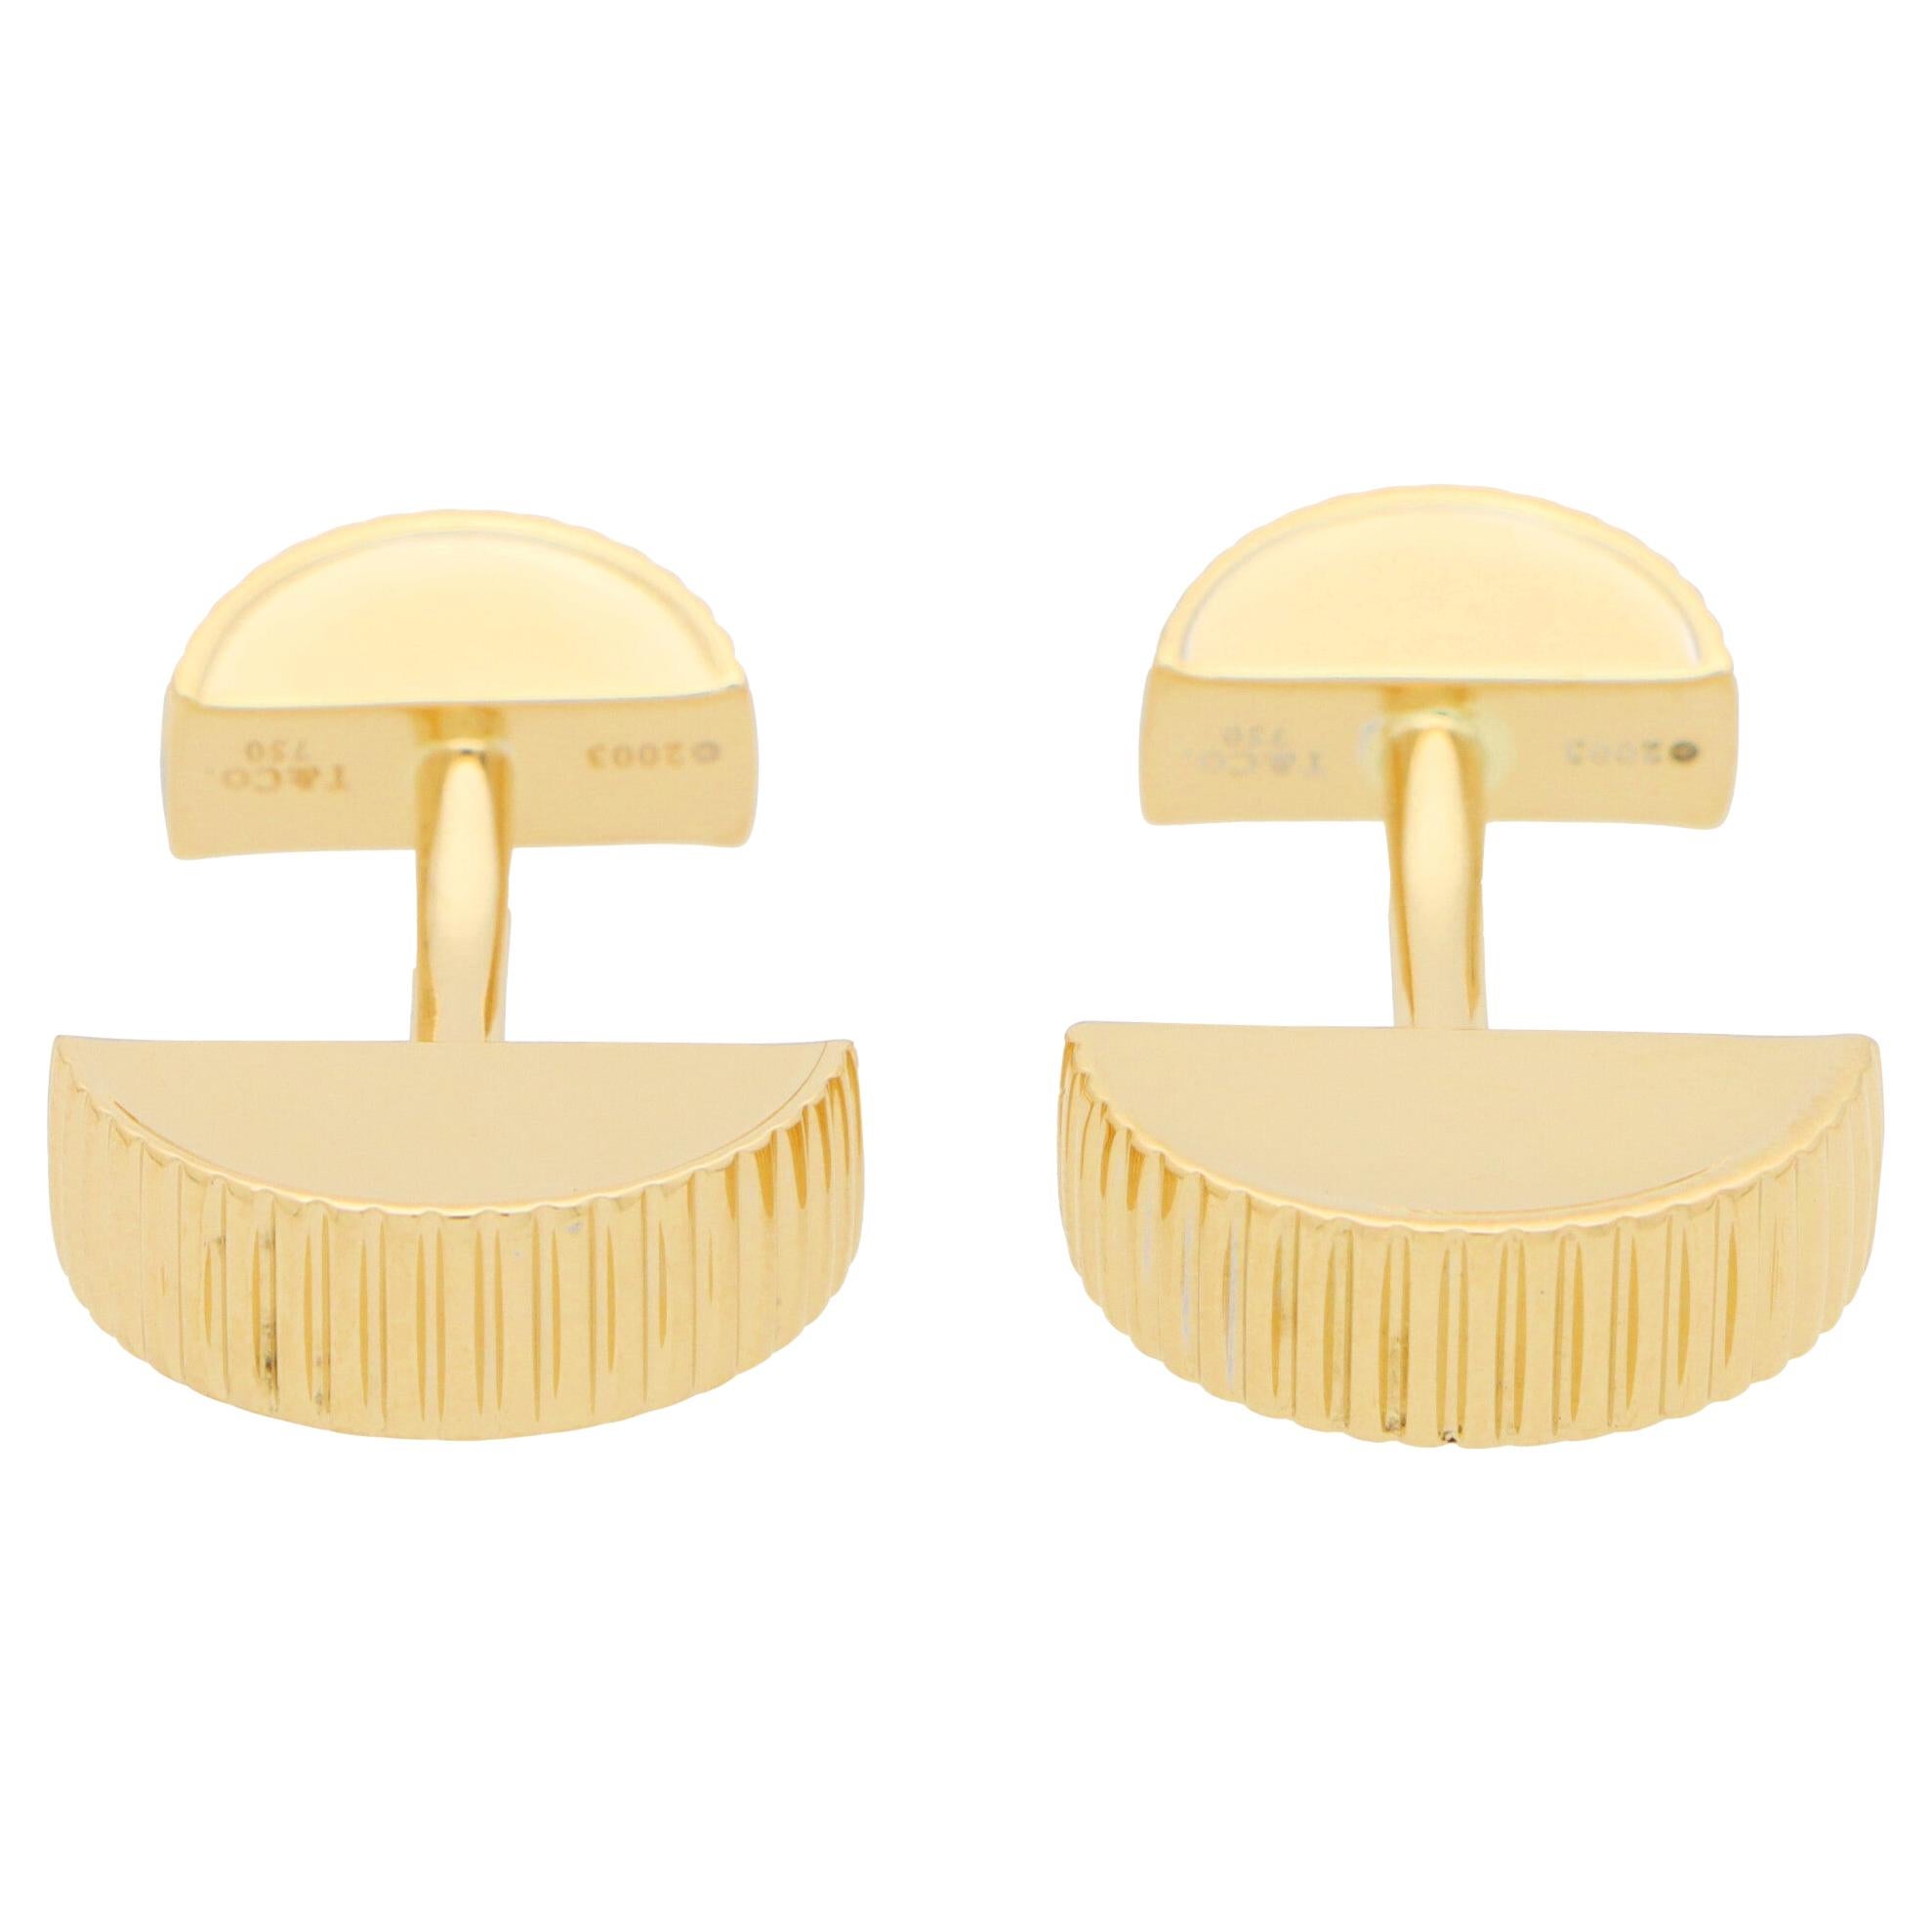 Vintage Tiffany & Co. Retro Cufflinks in Solid 18k Yellow Gold